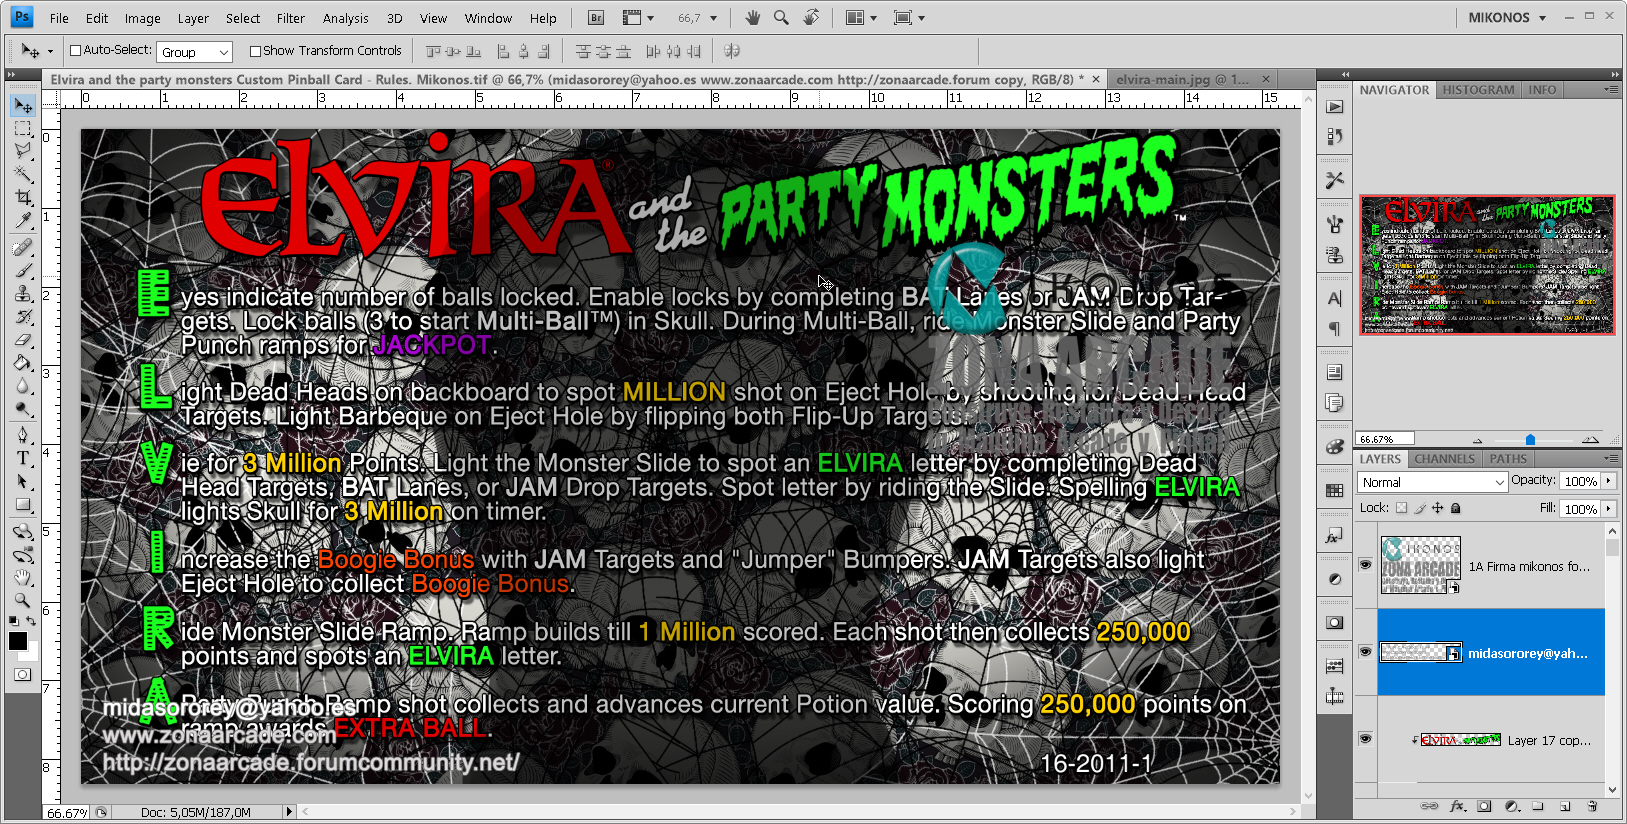 Elvira%20And%20The%20Party%20Monsters%20Pinball%20Card%20Customized%20-%20Rules.%20Mikonos1.jpg